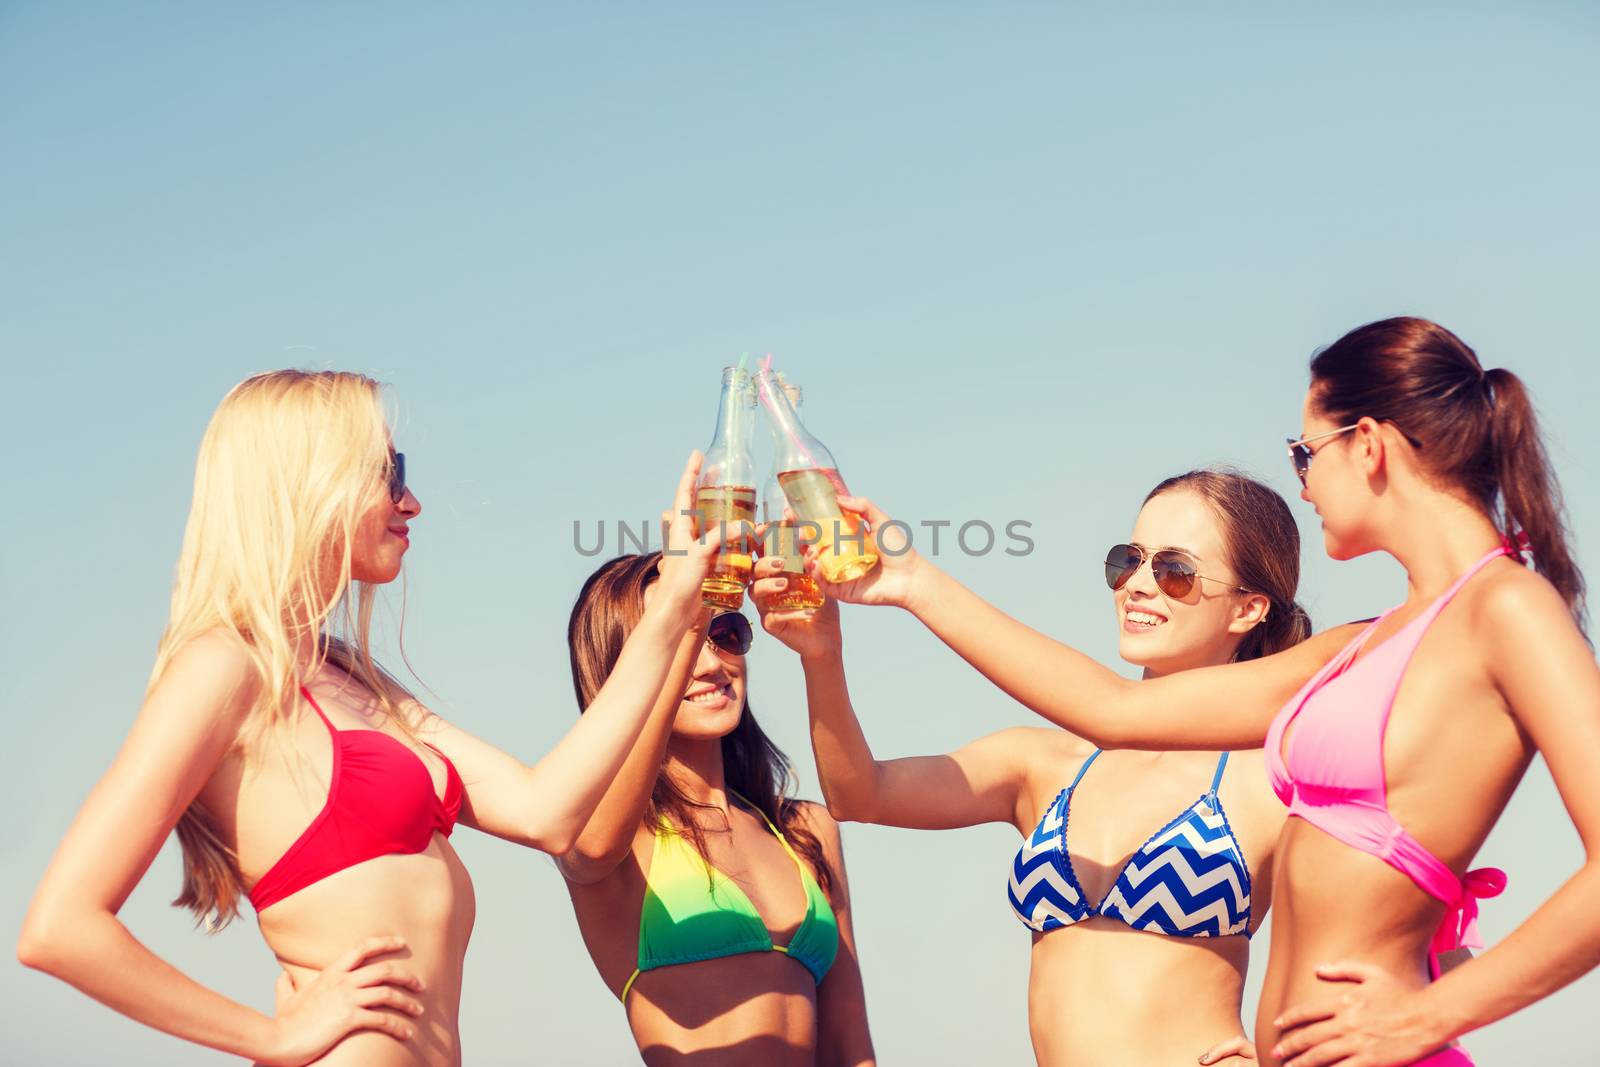 group of smiling young women drinking on beach by dolgachov